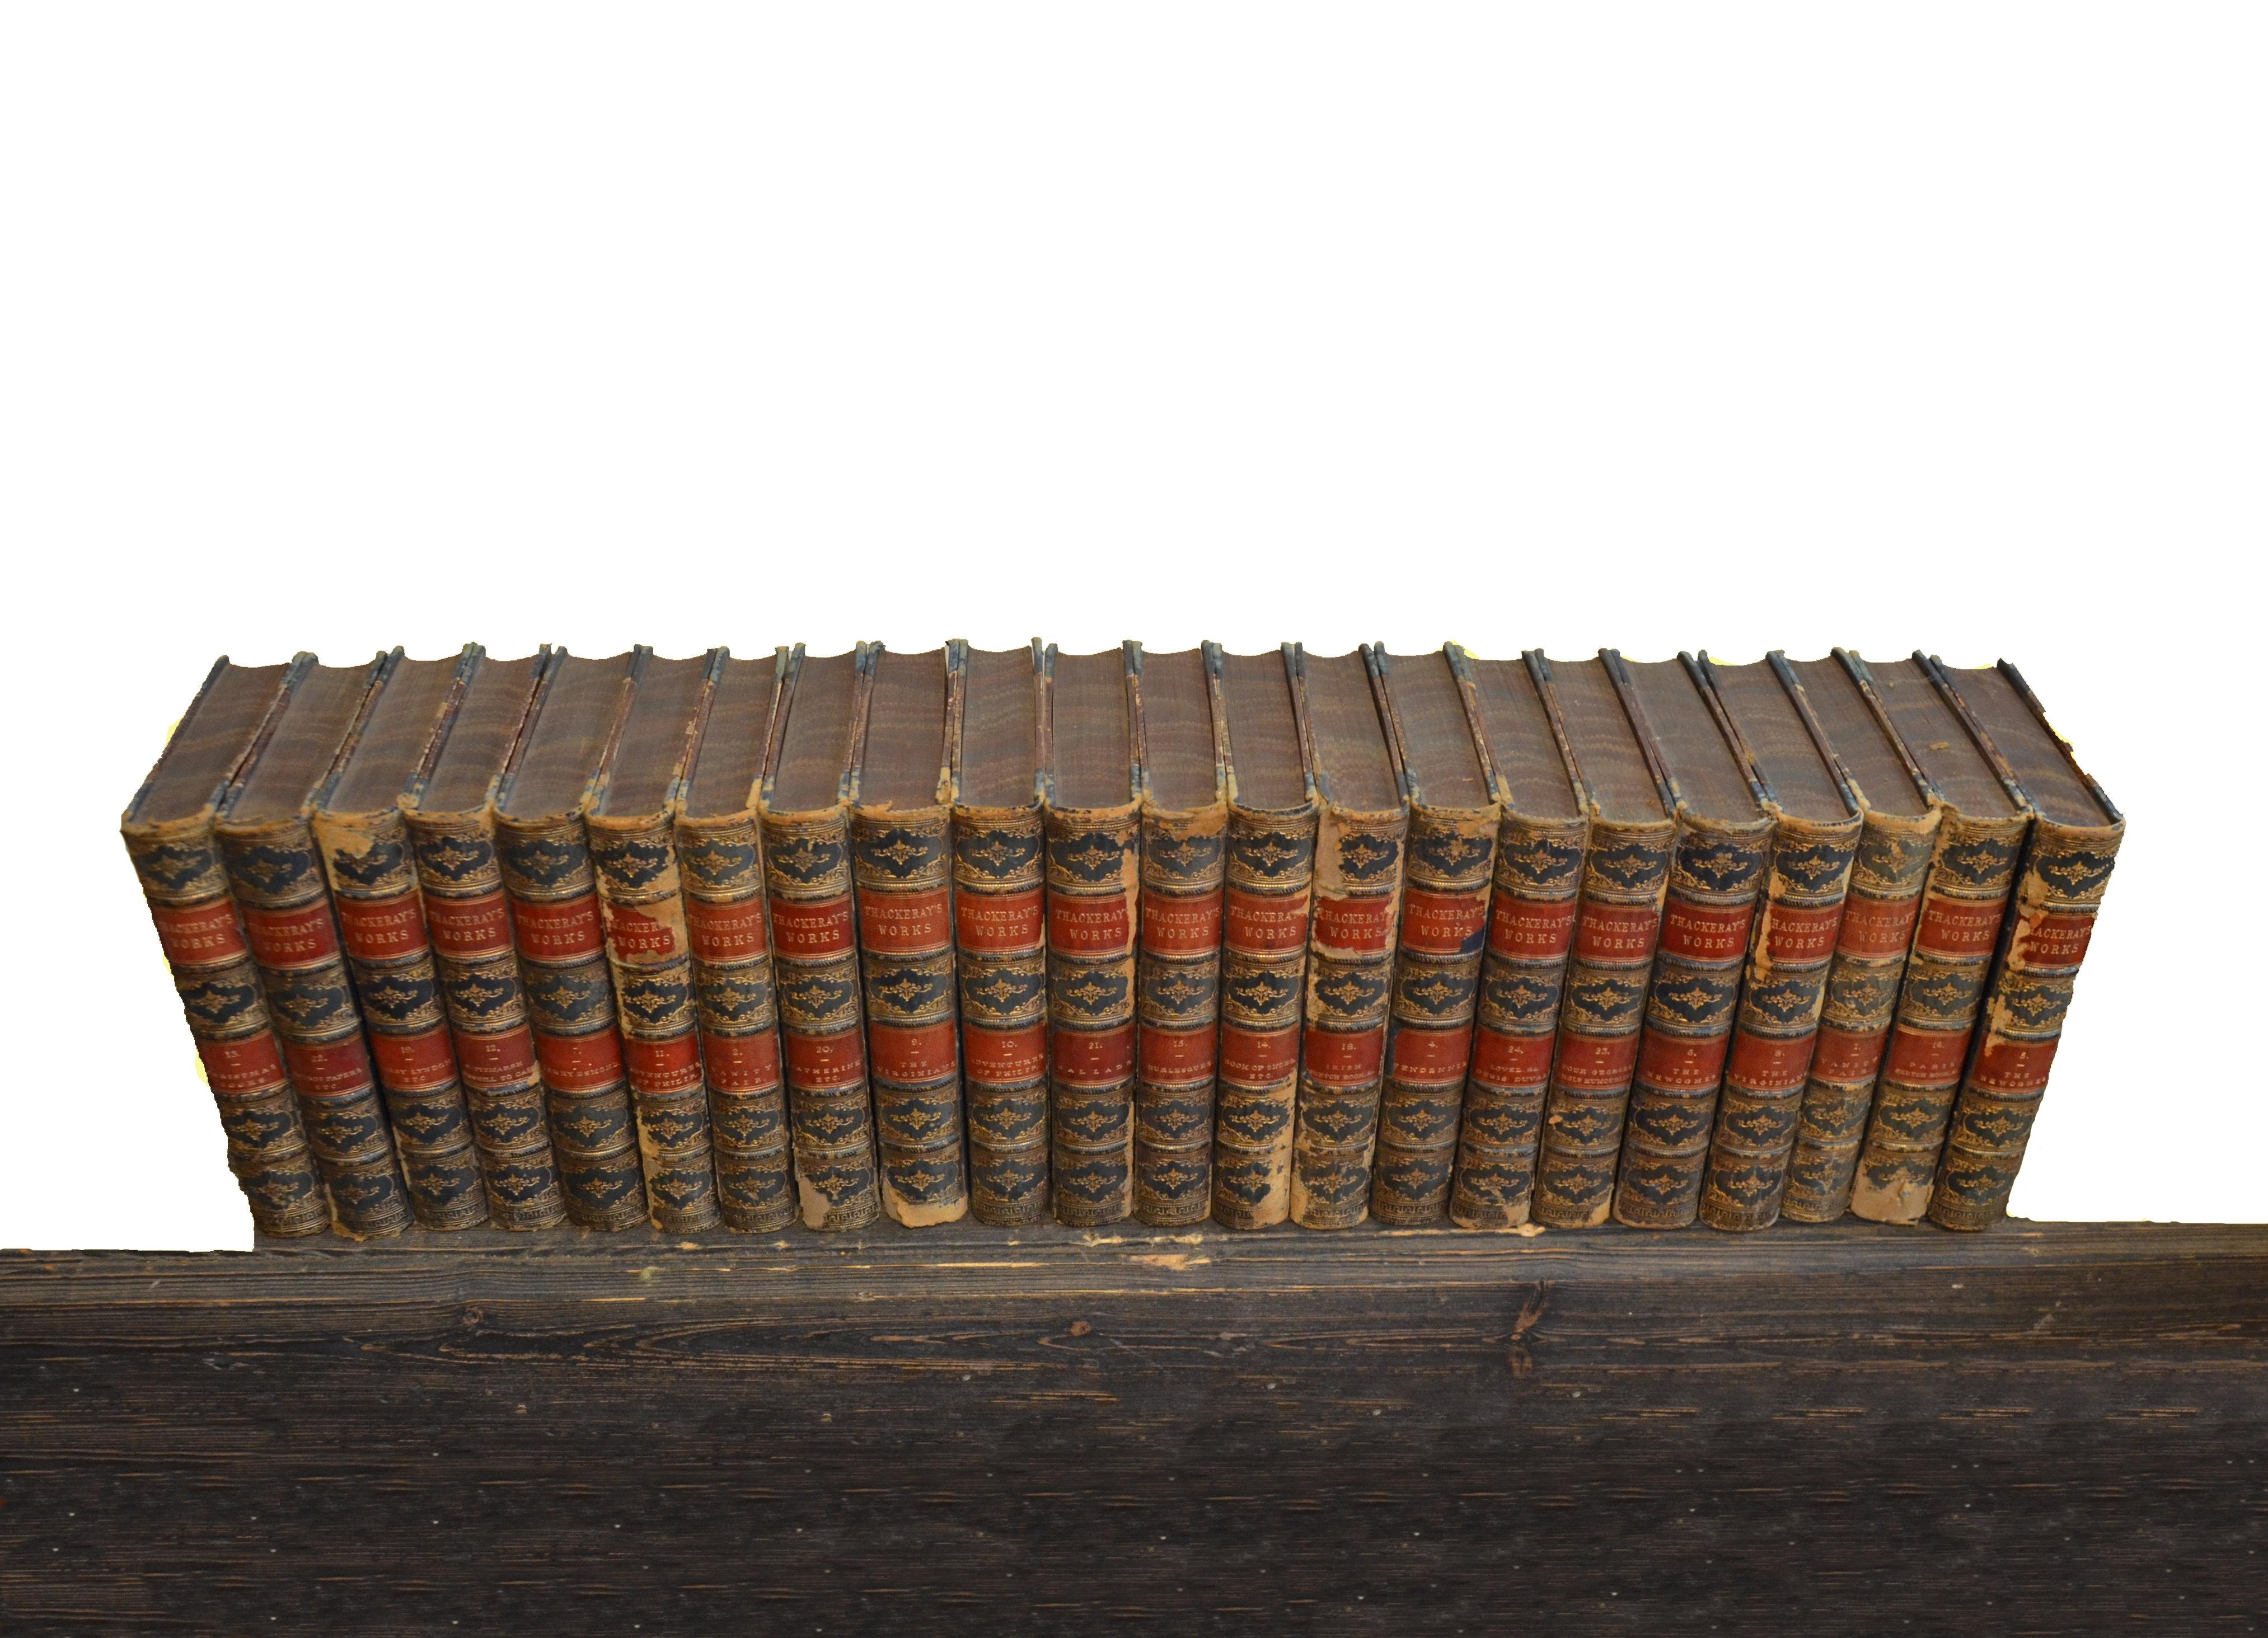 This attractive collection of leather-bound English Literature books contains a group of 22 books, in a warm rich tone of tan and black, with red trim and gold leaf embossing. Aside from a few books that have minor scuffs and scratches along with